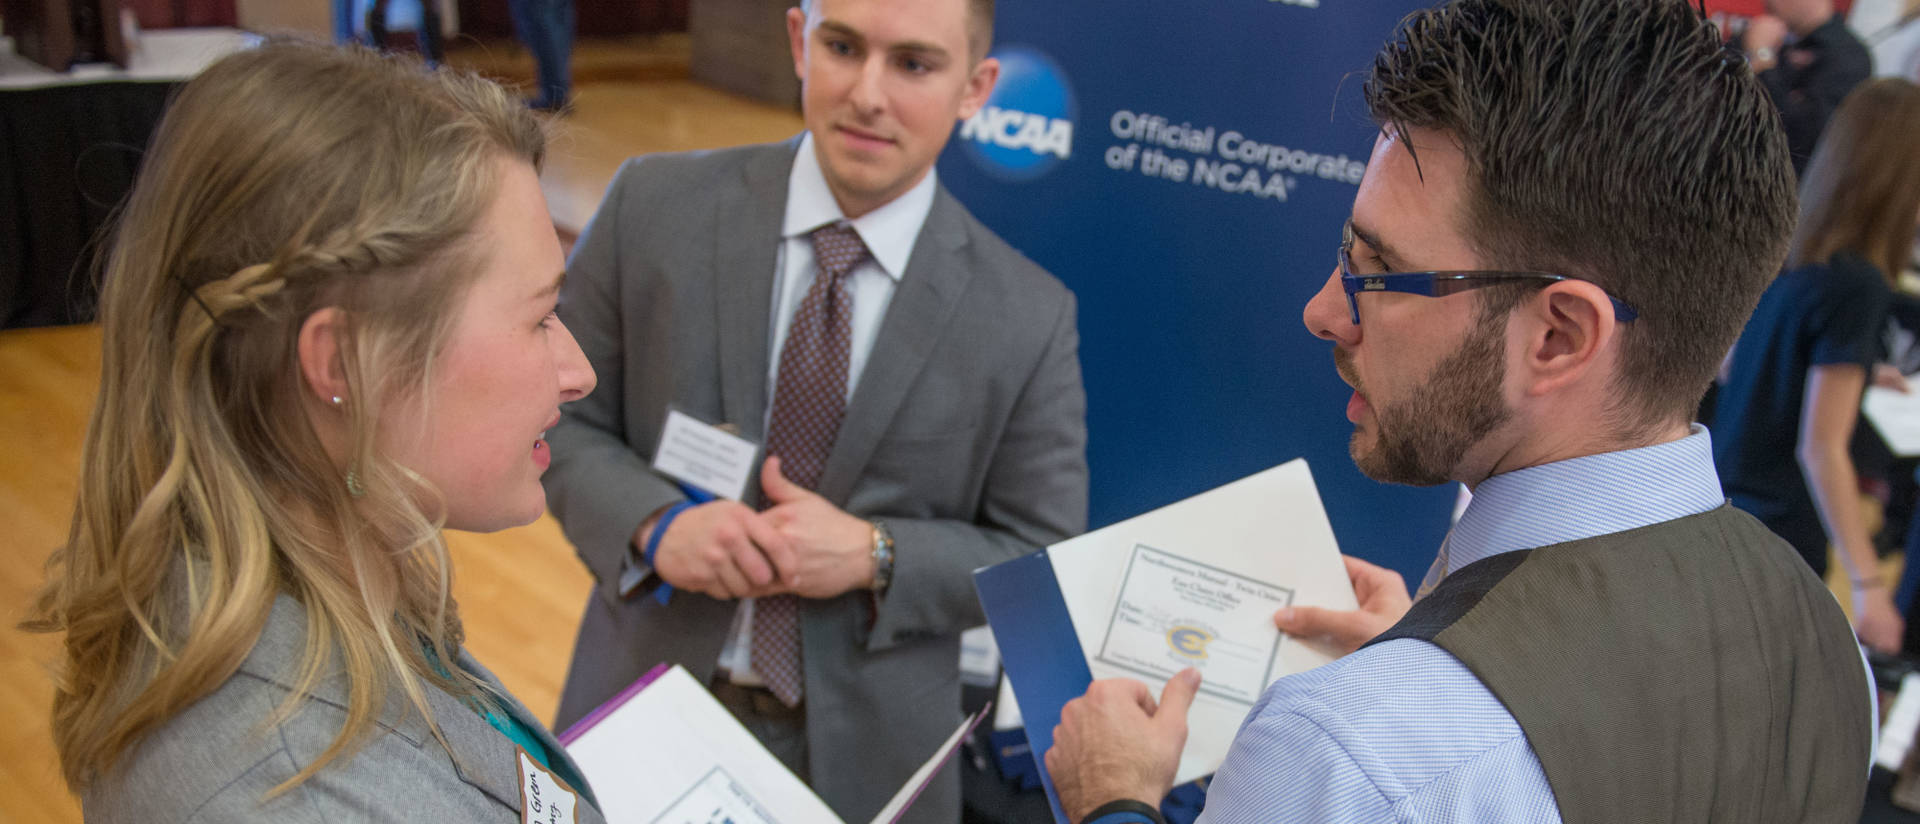 Students, alumni and employers participating in a Career Fair in W. R. Davies Center on the UW-Eau Claire campus.